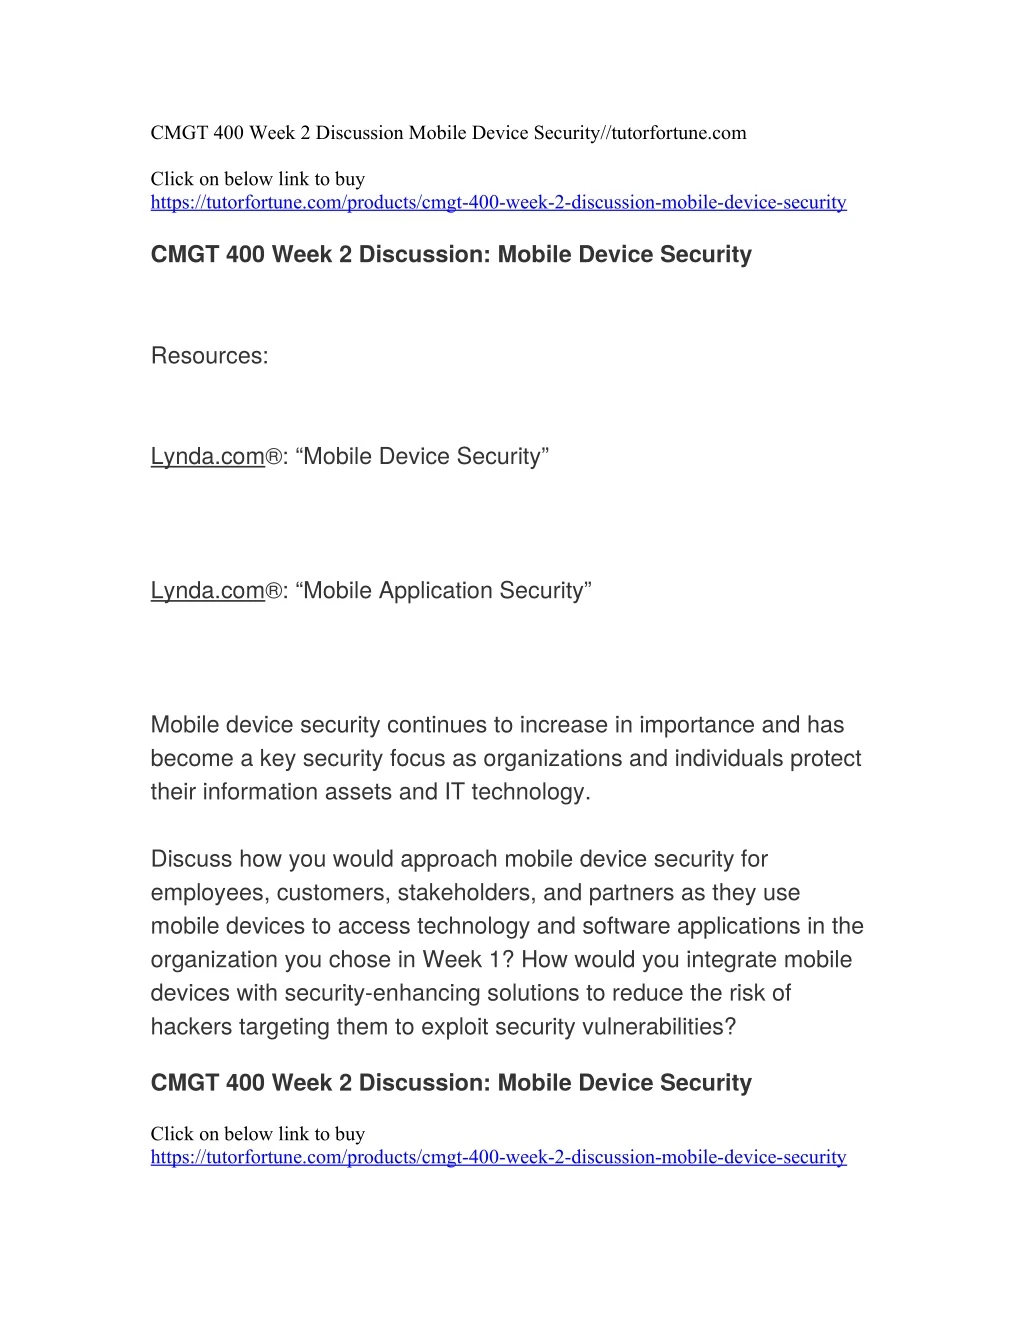 cmgt 400 week 2 discussion mobile device security